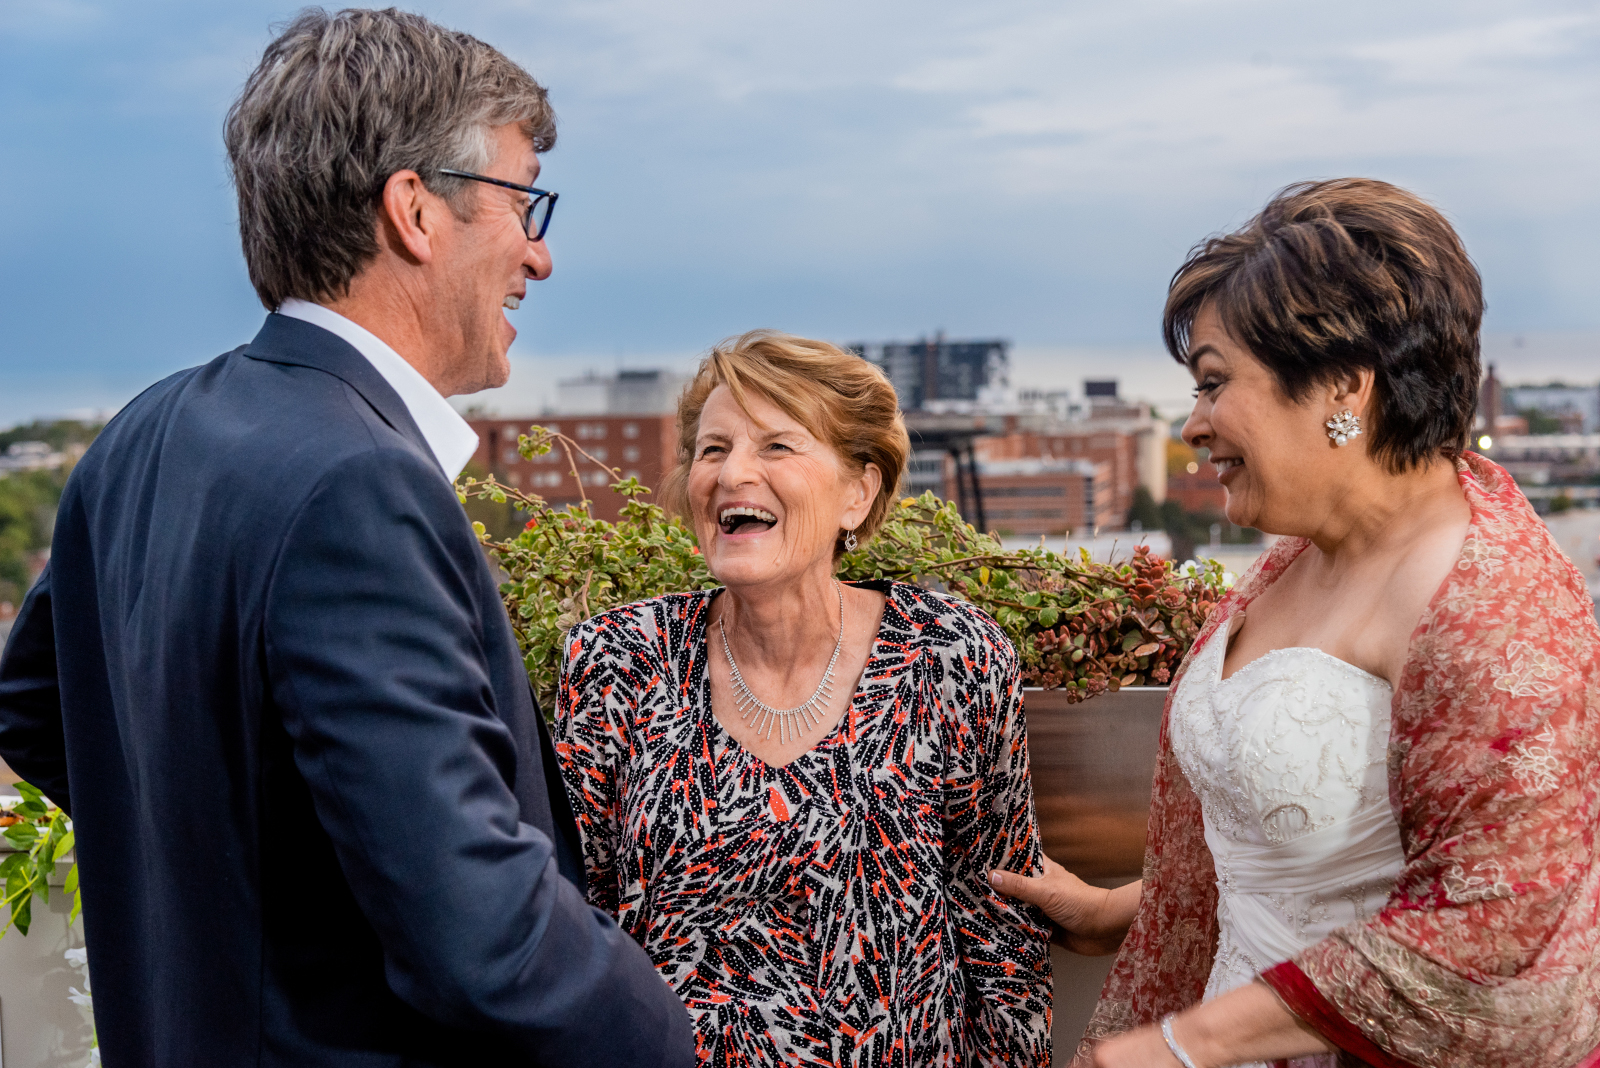 Bride and groom with groom's mom, mother of the groom, smiling, laughing, candid wedding photo, gorgeous wedding photo, cute, sweet, older couple, romantic urban wedding ceremony at Penthouse Events, Ohio City, Cleveland flats, downtown Cleveland skyline, Lake Erie